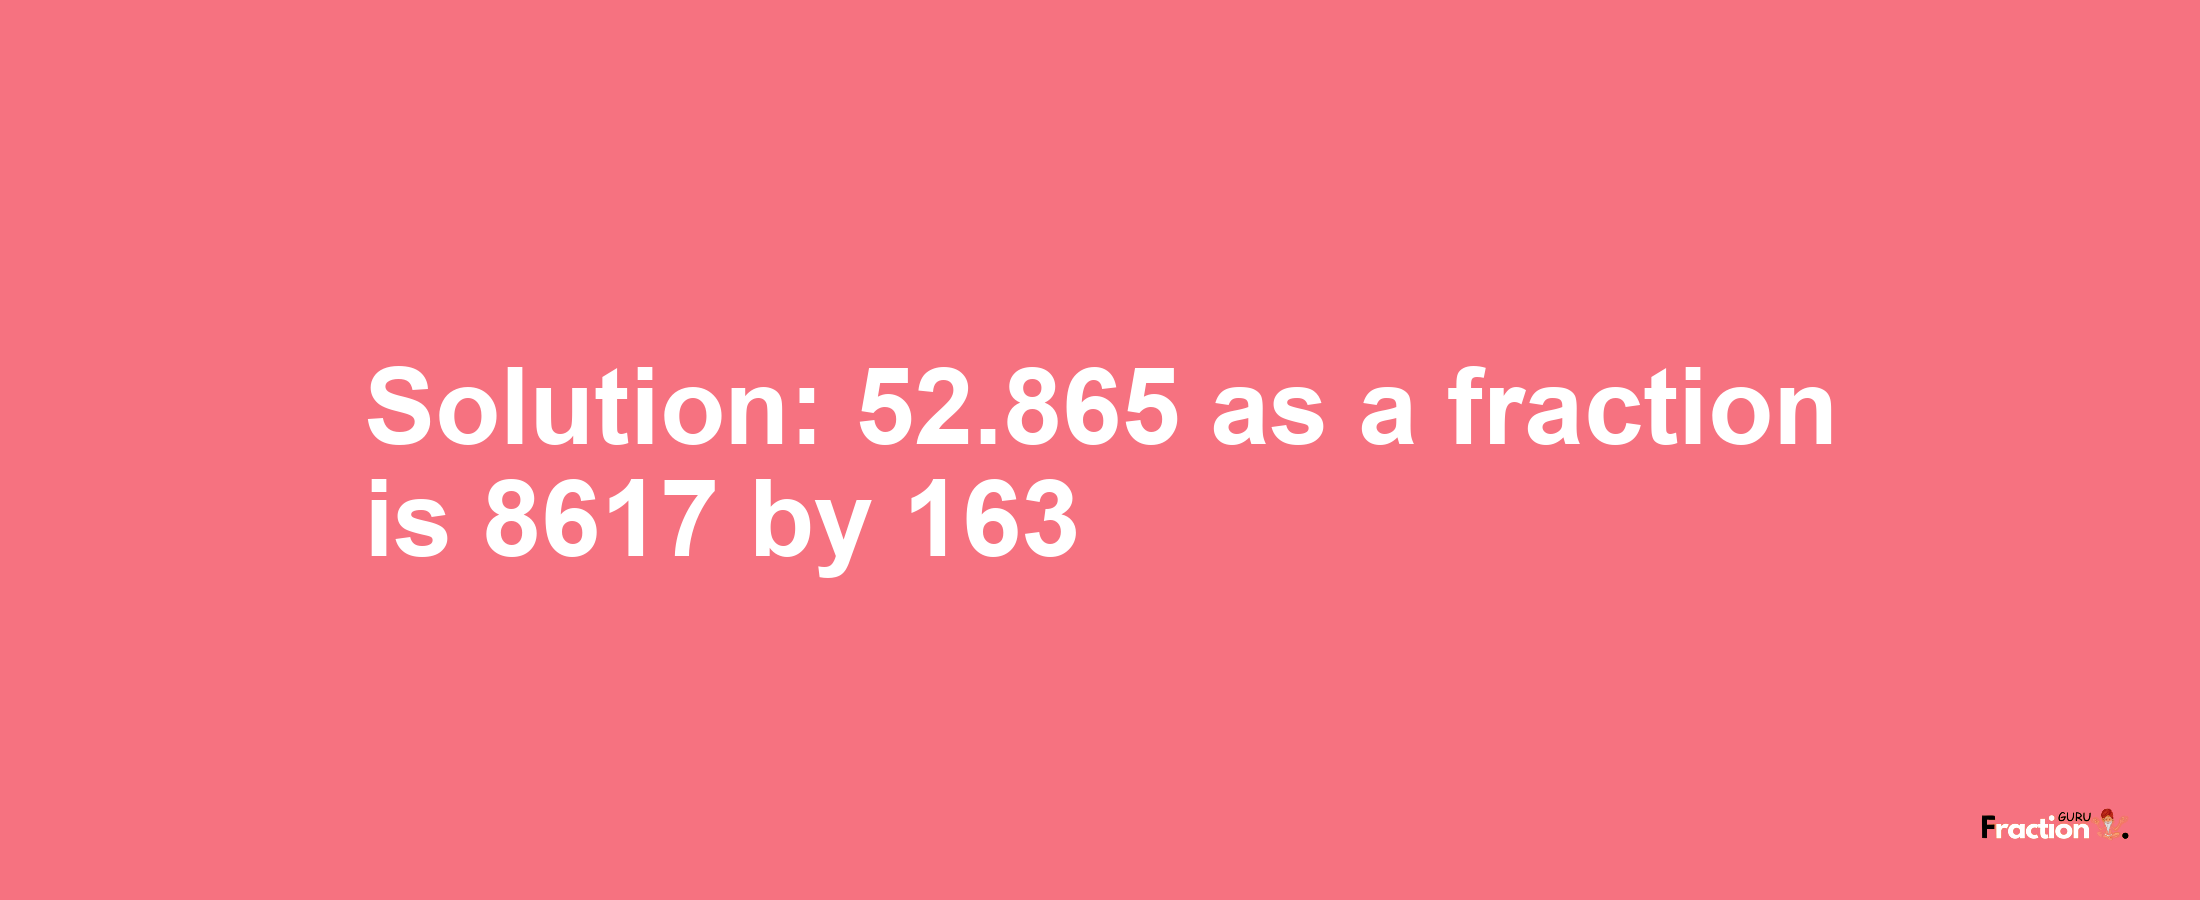 Solution:52.865 as a fraction is 8617/163